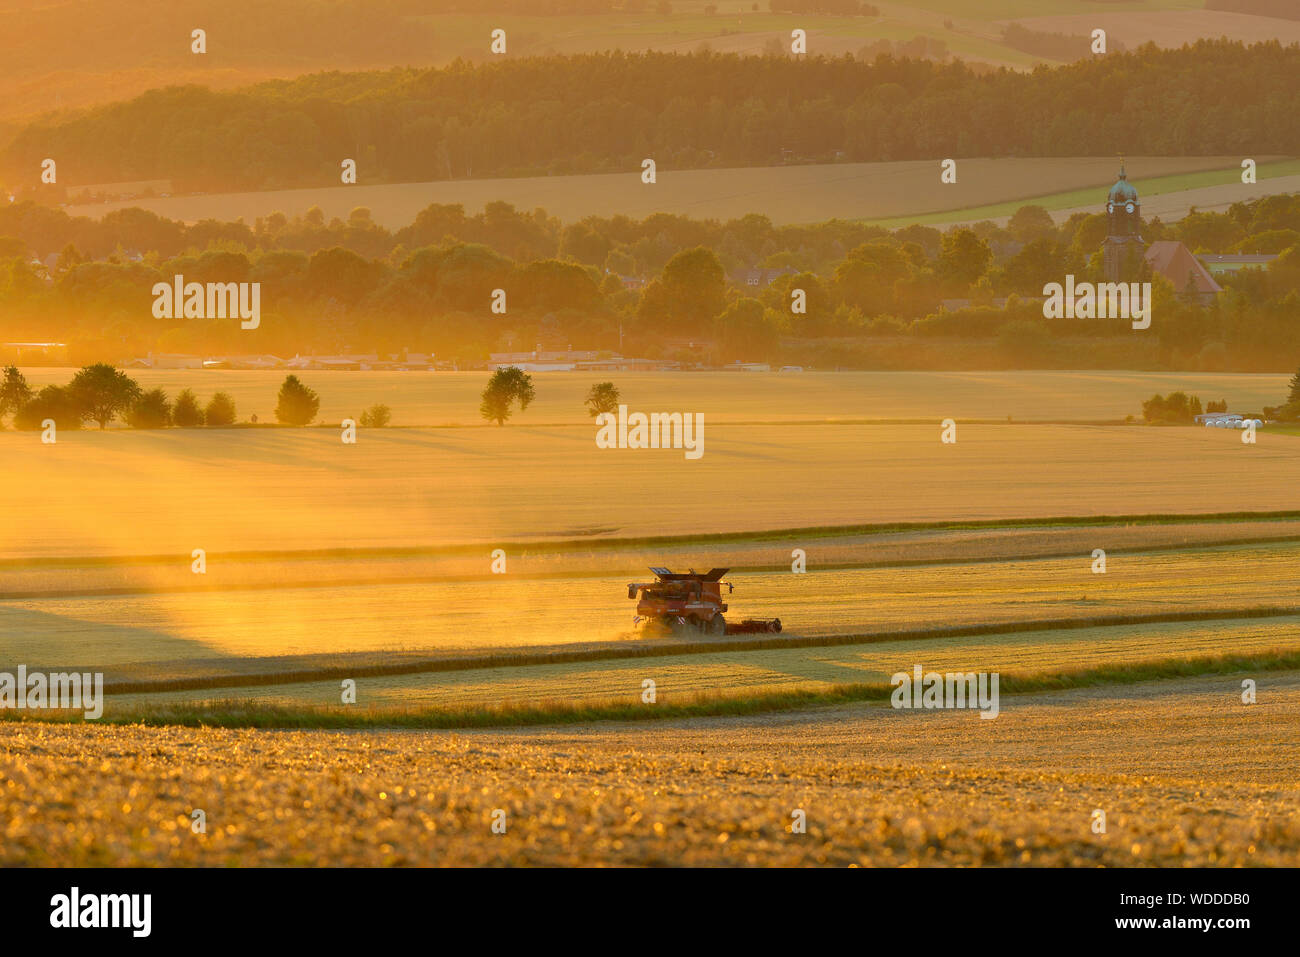 Landscape with harvesting machinery in field, Germany Stock Photo